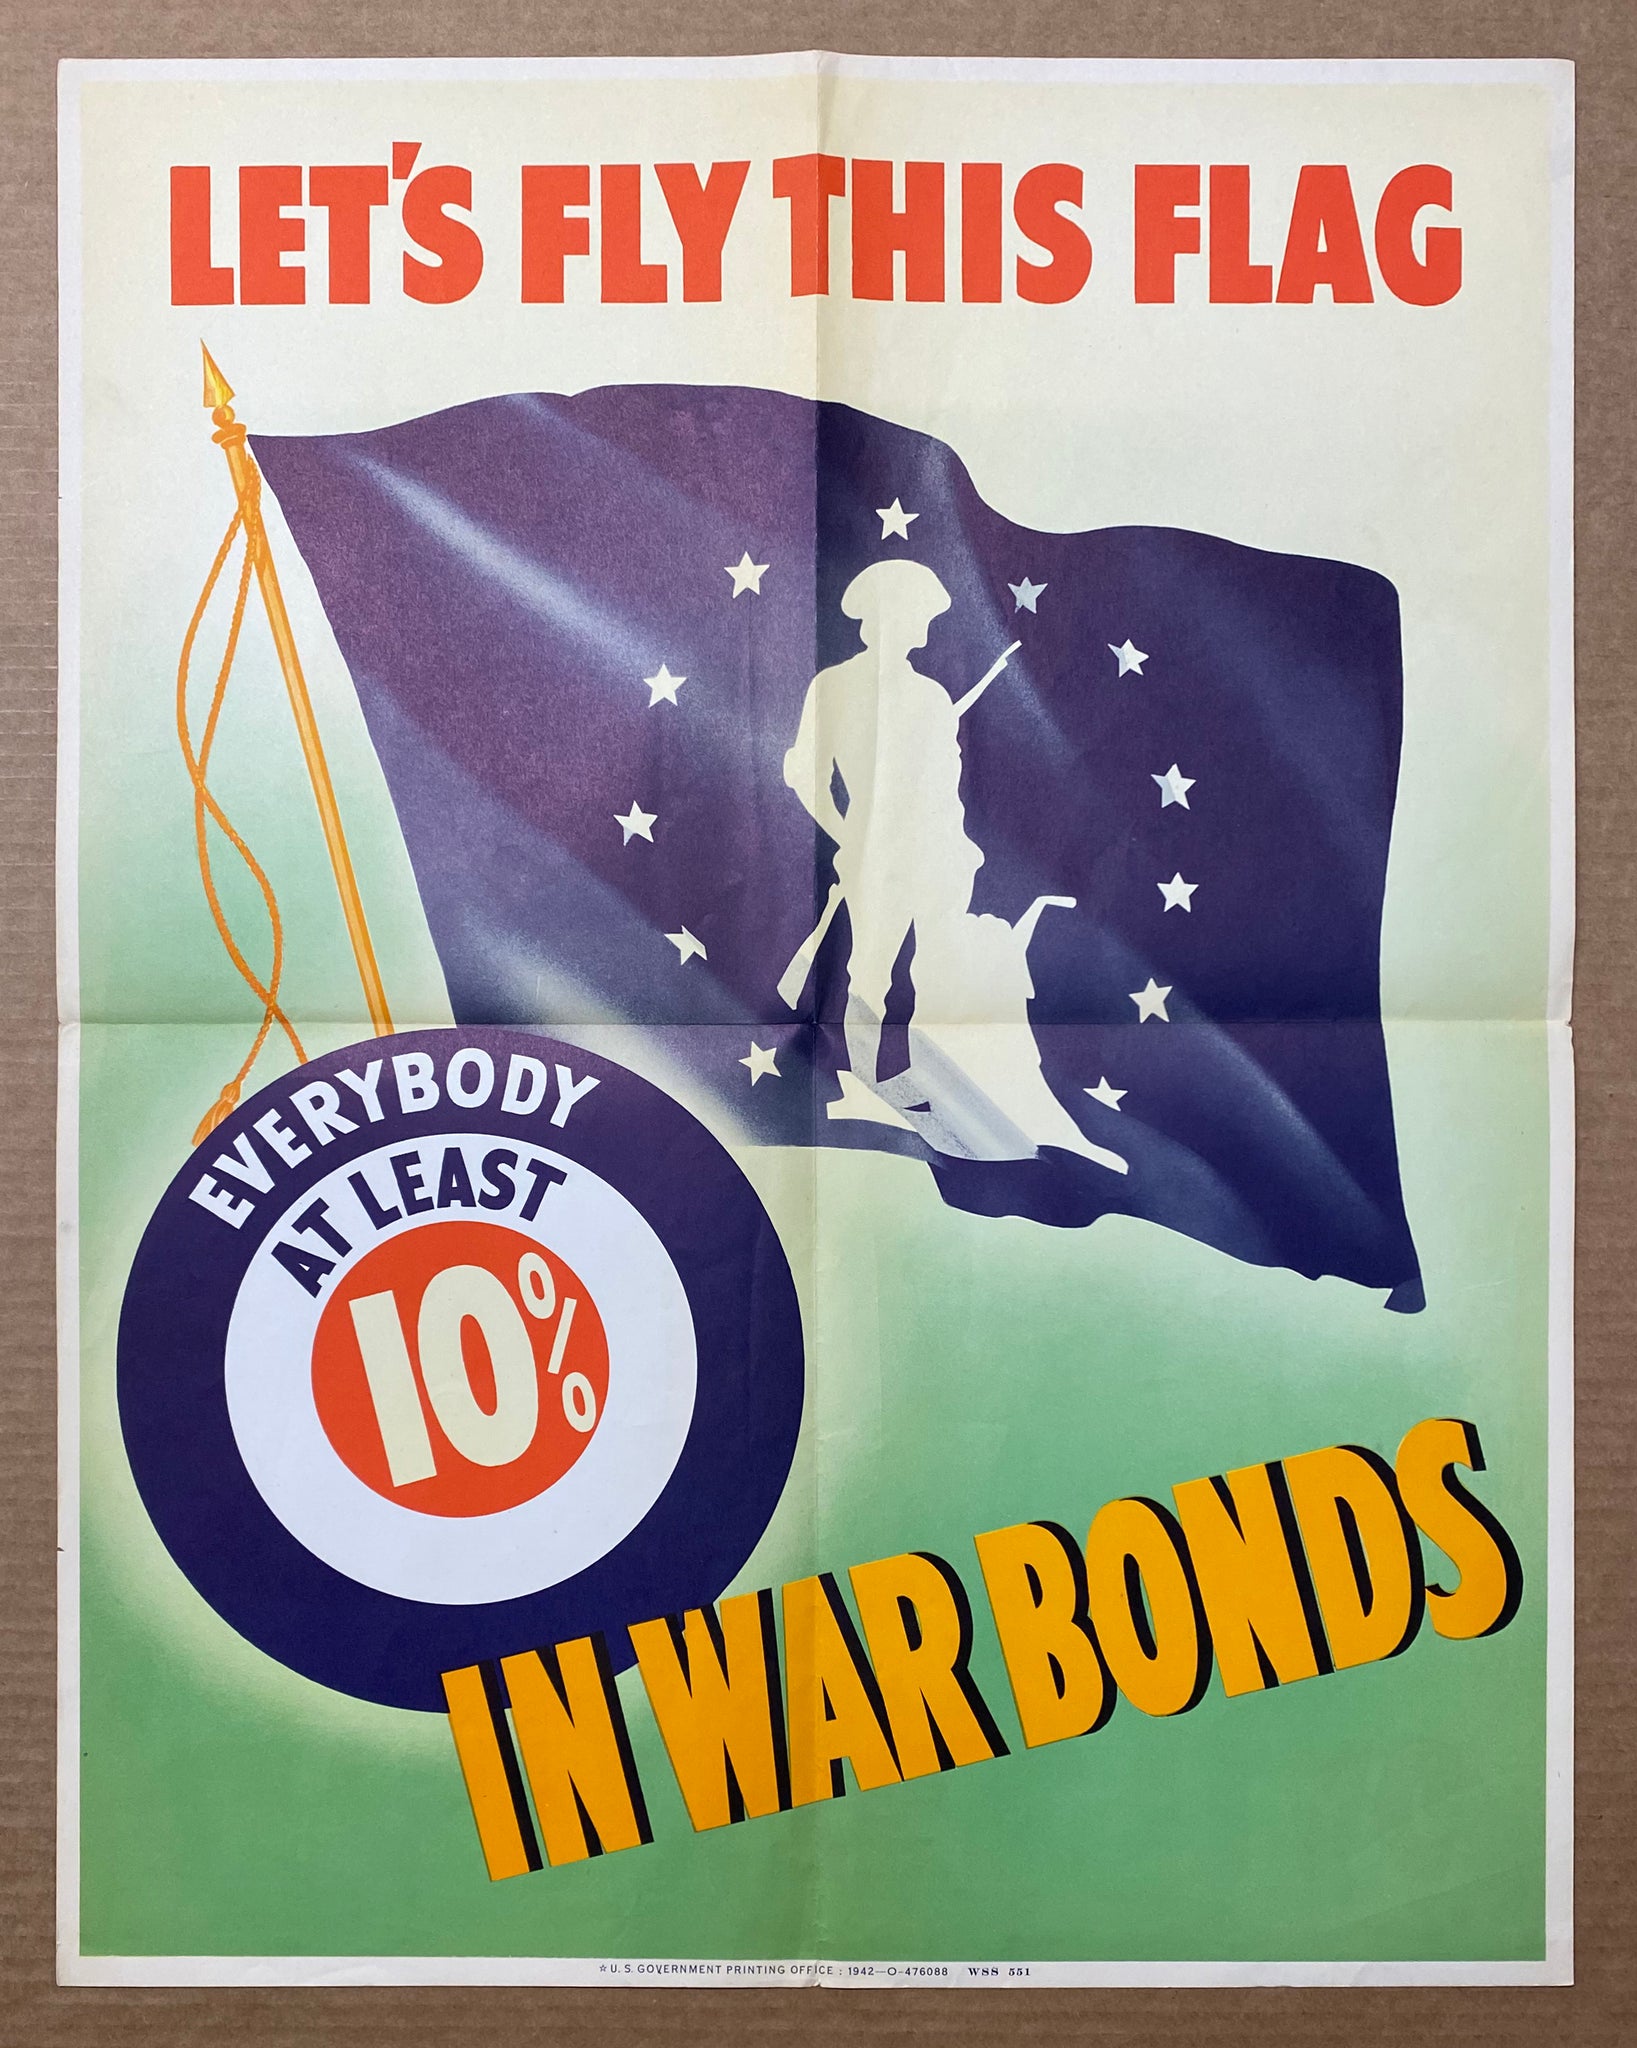 1942 Let's Fly This Flag Everybody At Least 10% In War Bonds Minuteman